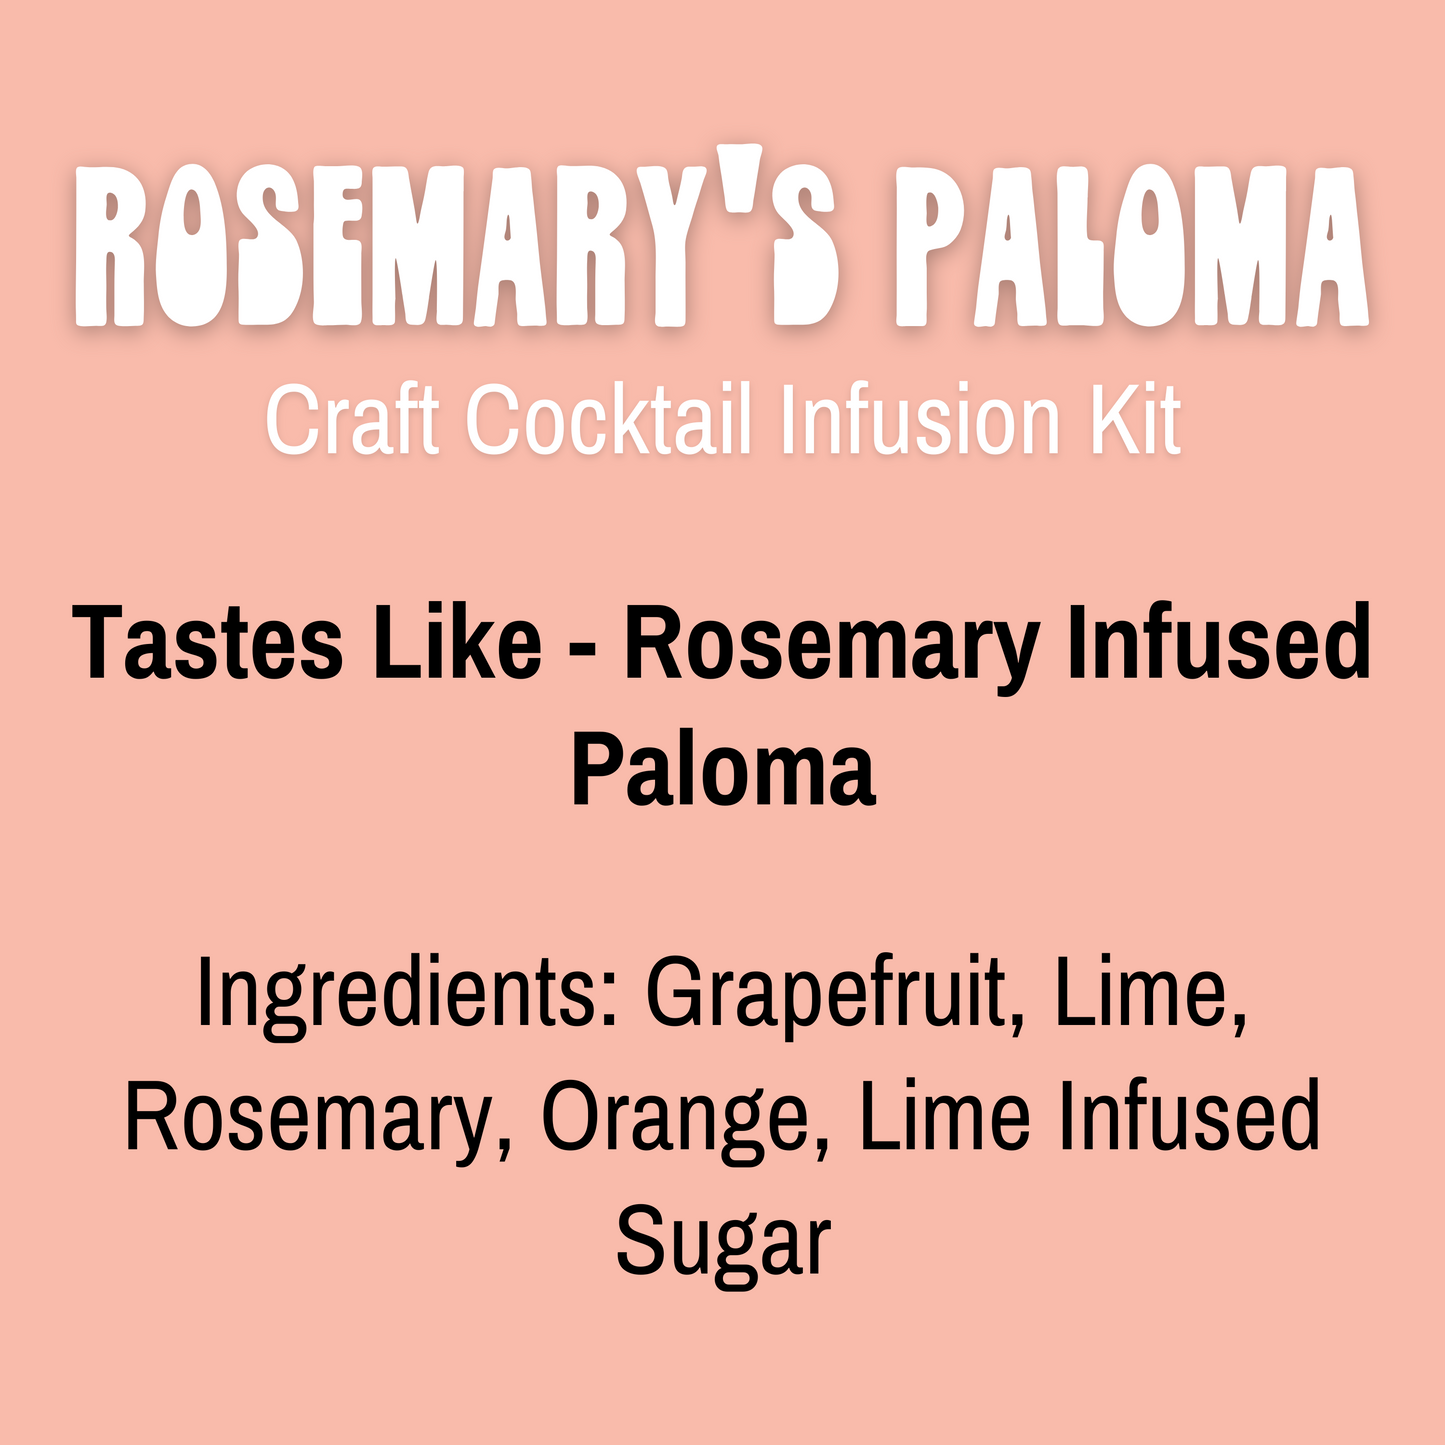 Rosemary's Paloma Craft Cocktail Infusion Kit